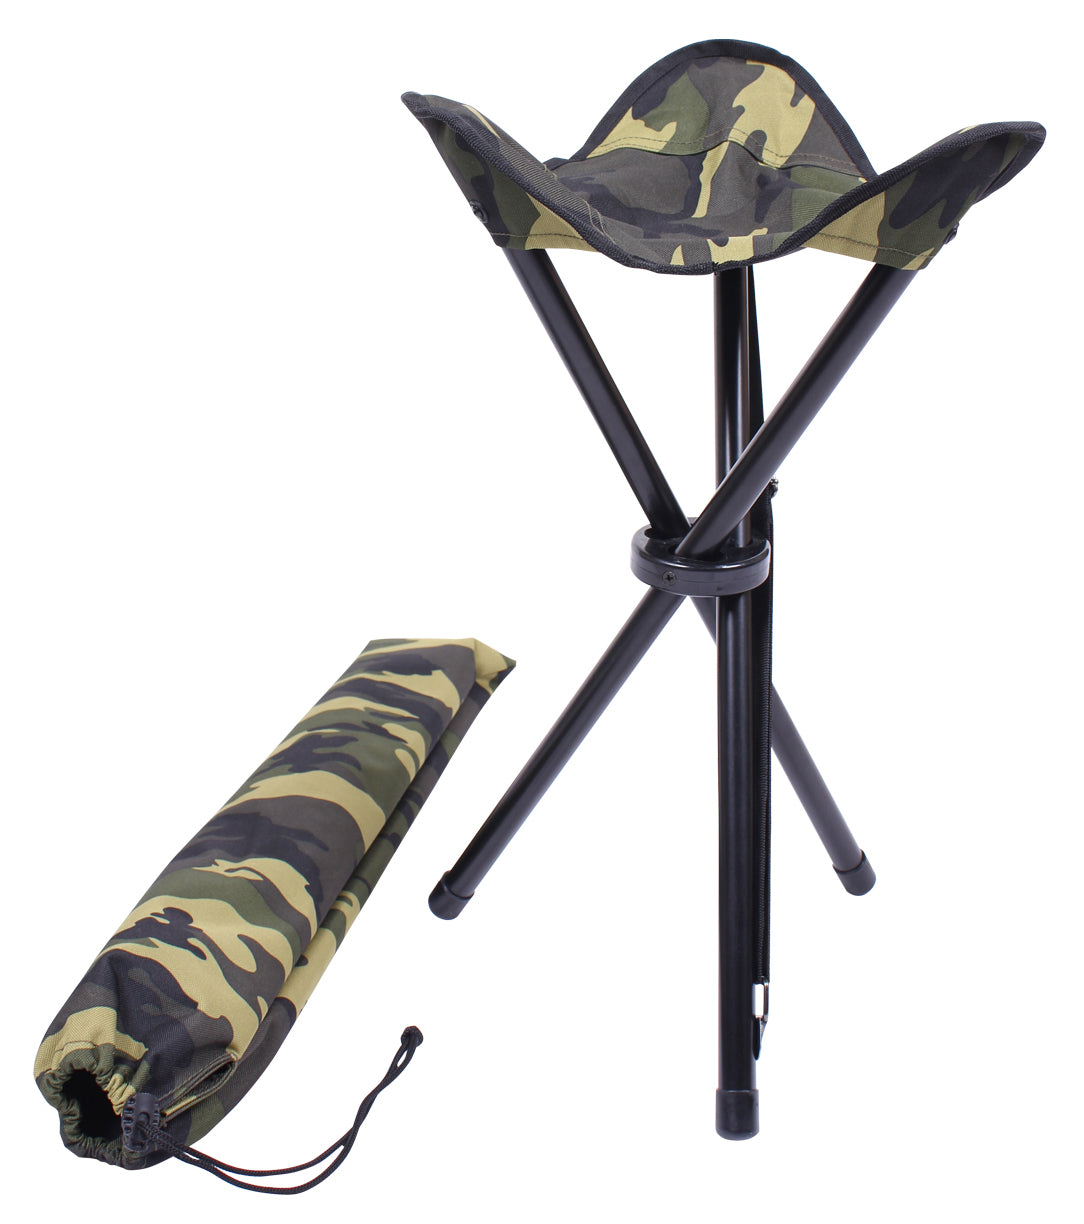 Milspec Collapsible Stool With Carry Strap Camp Stools & Chairs MilTac Tactical Military Outdoor Gear Australia